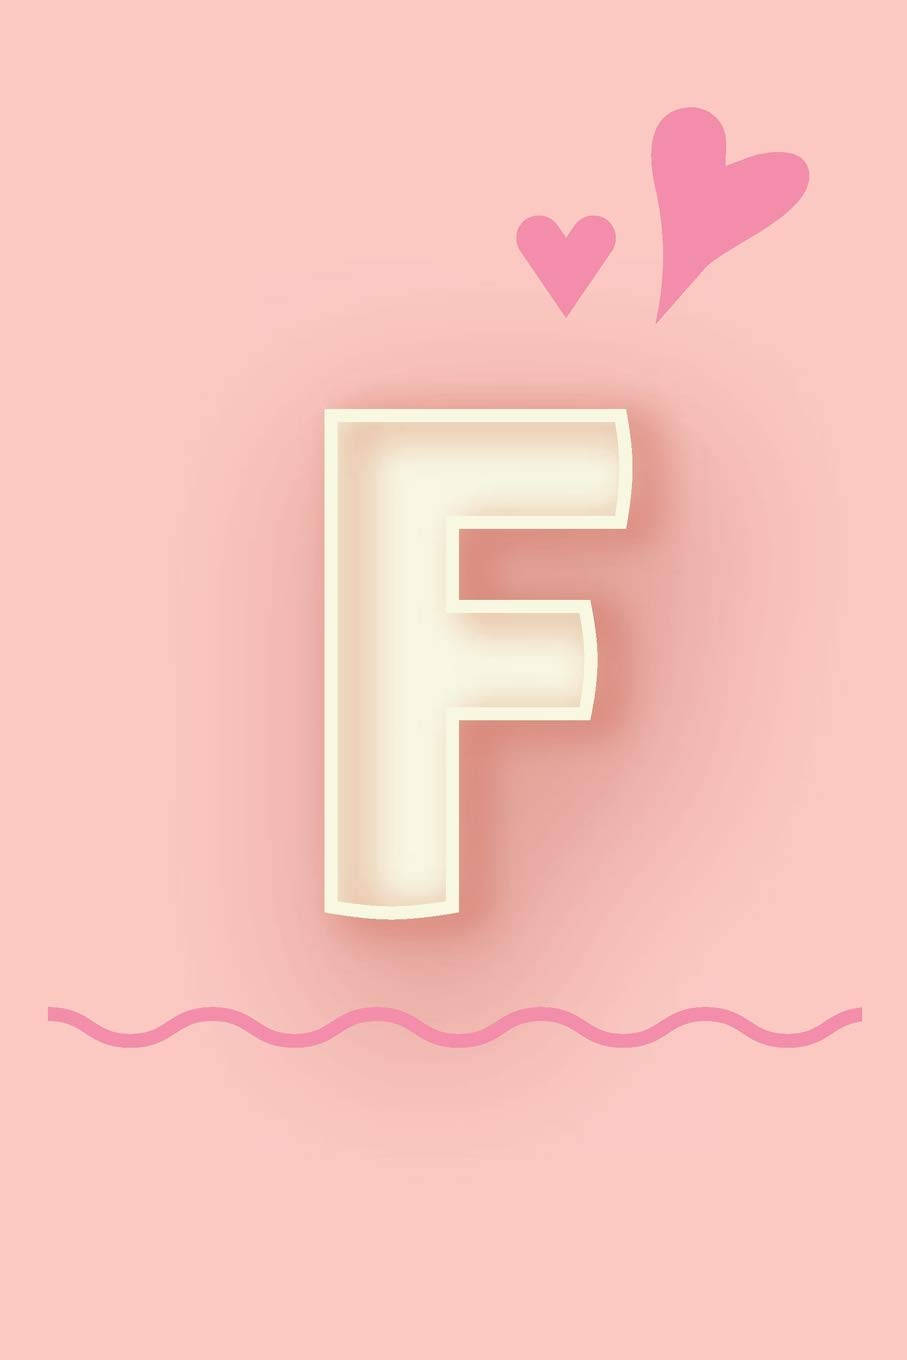 F Letter Wallpapers - Wallpaper Cave